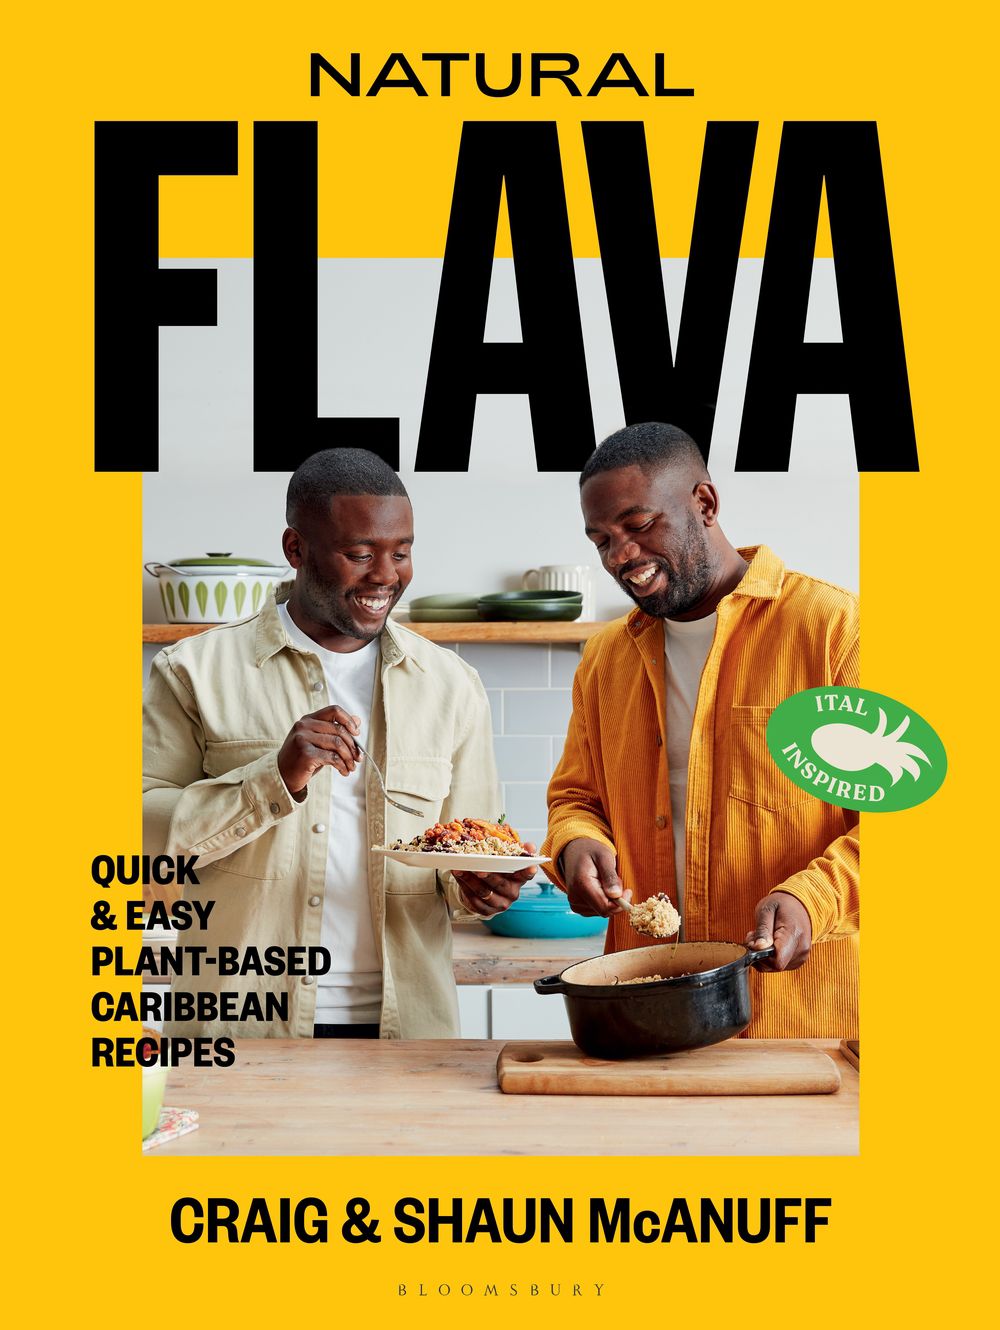 The cover of the Natural Flava cookbook shows the McAnuff brothers in the kitchen, tasting food.